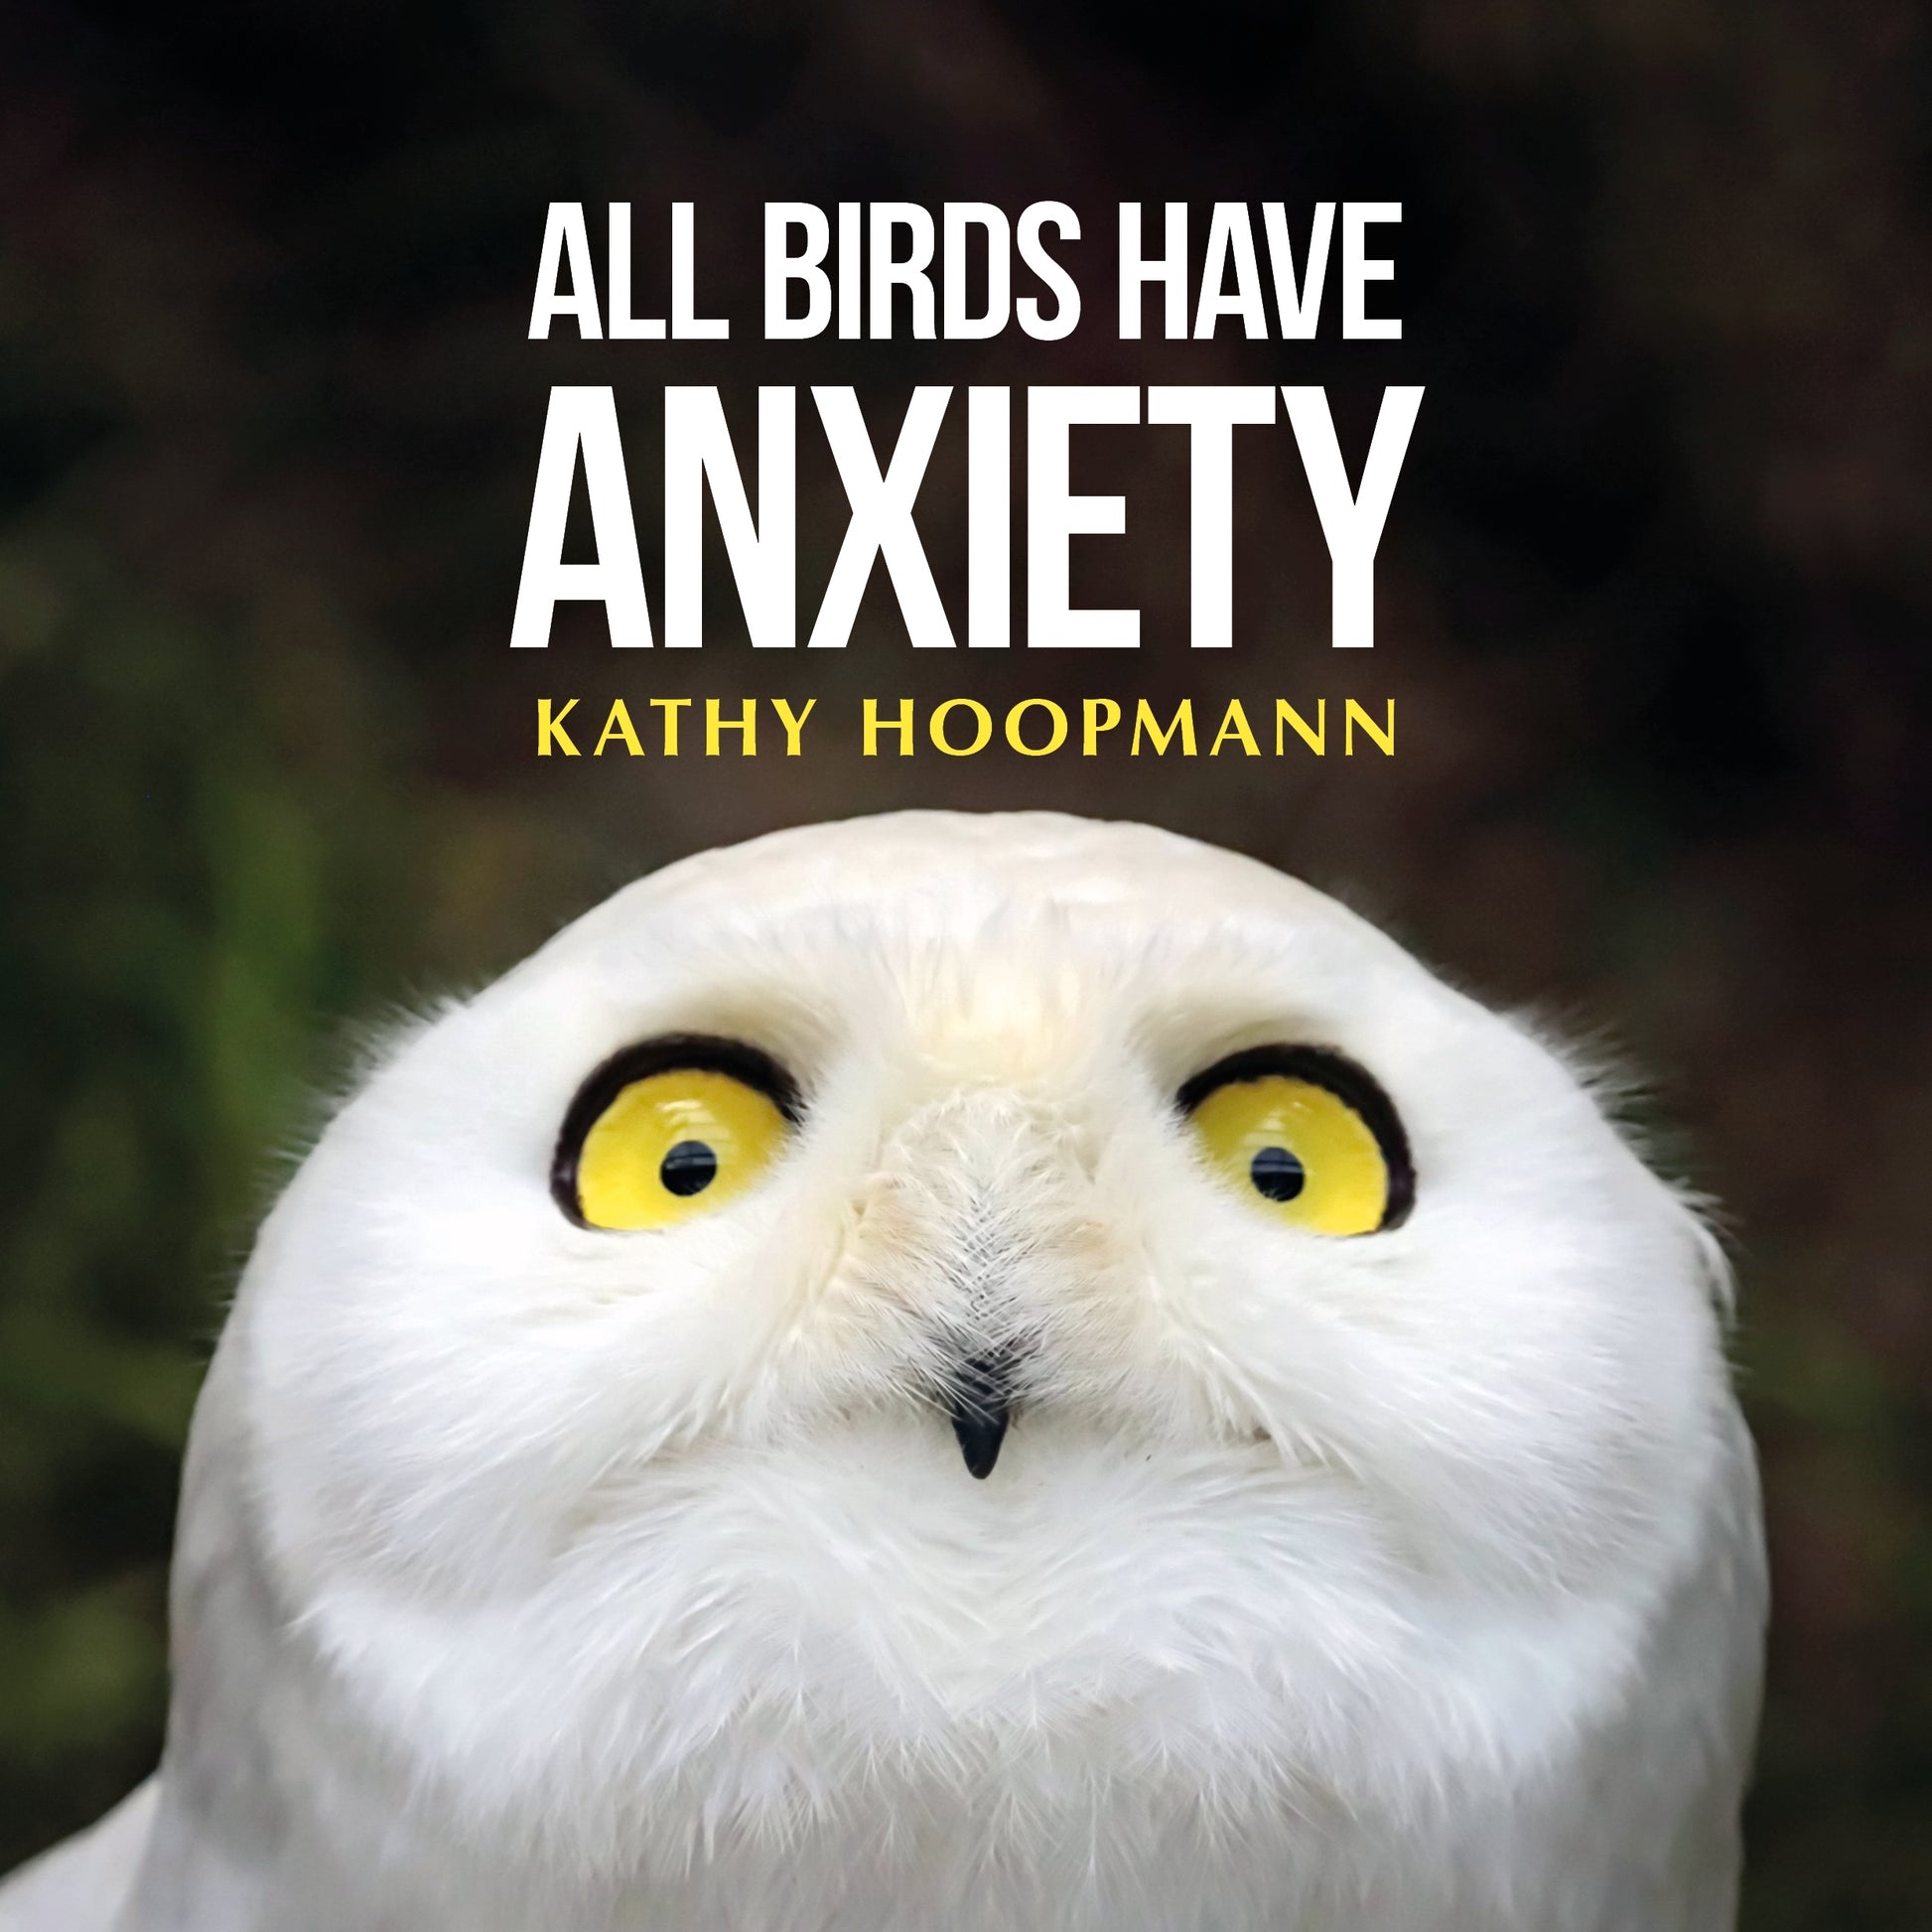 All Birds Have Anxiety by Kathy Hoopmann